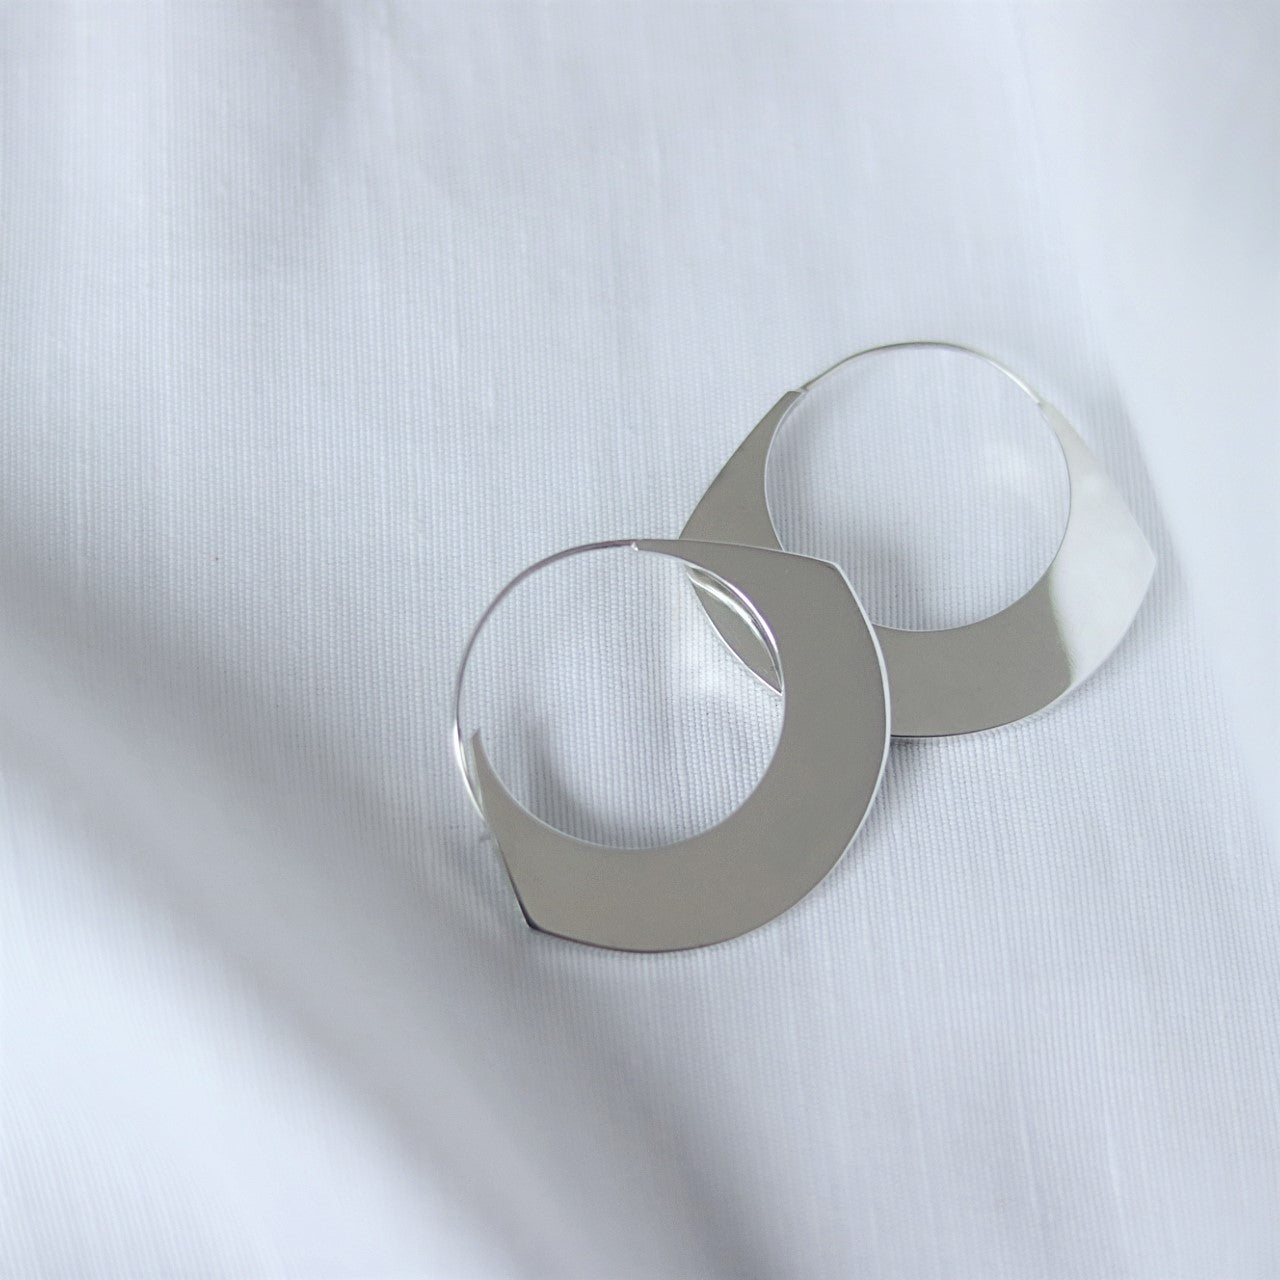 Sterling silver statement earrings on white linen background